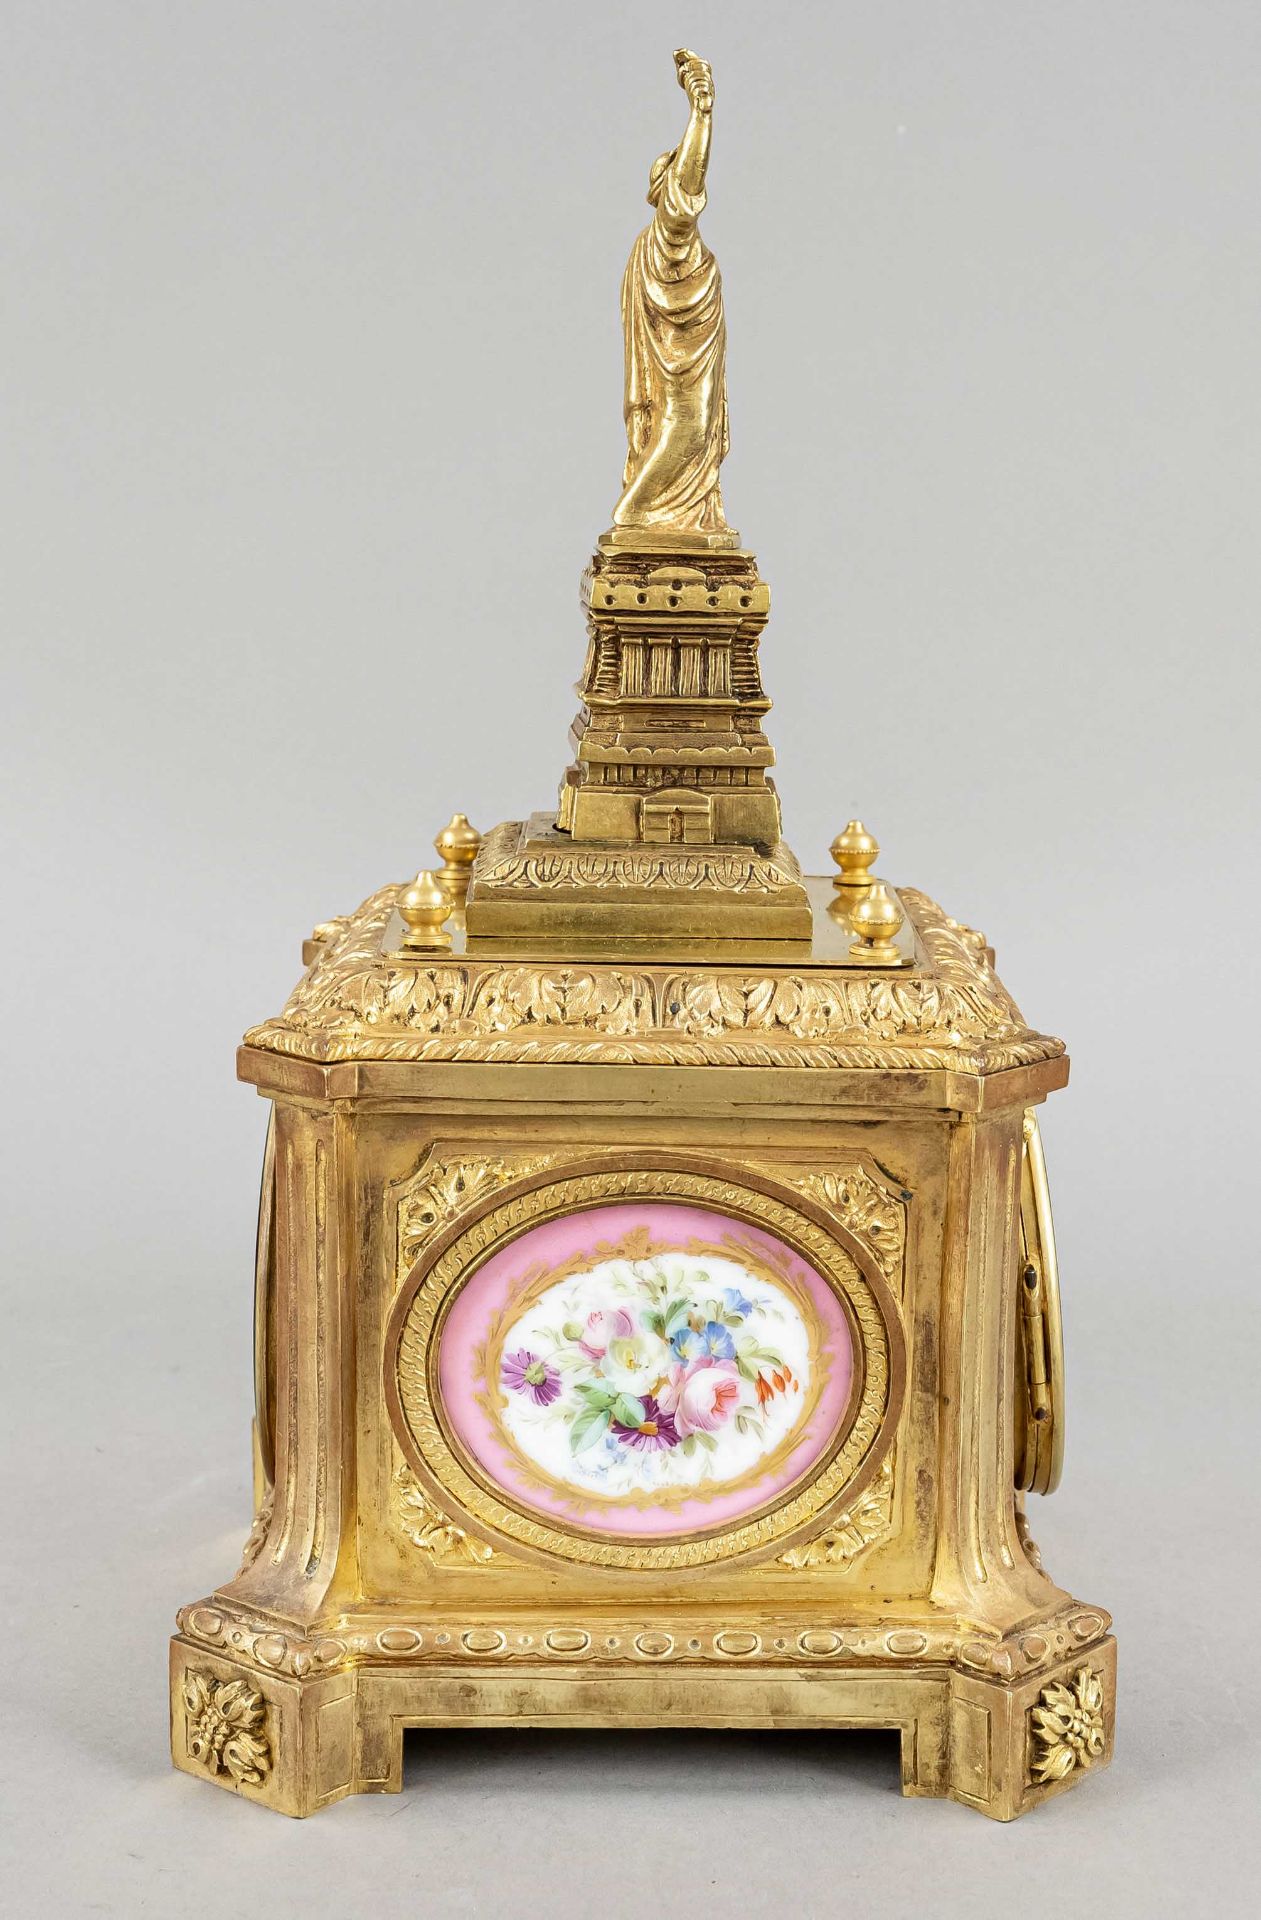 qudratic figure pendulum, with statue of joy, 2nd half of 19th century, case decorated with leaves - Image 2 of 3